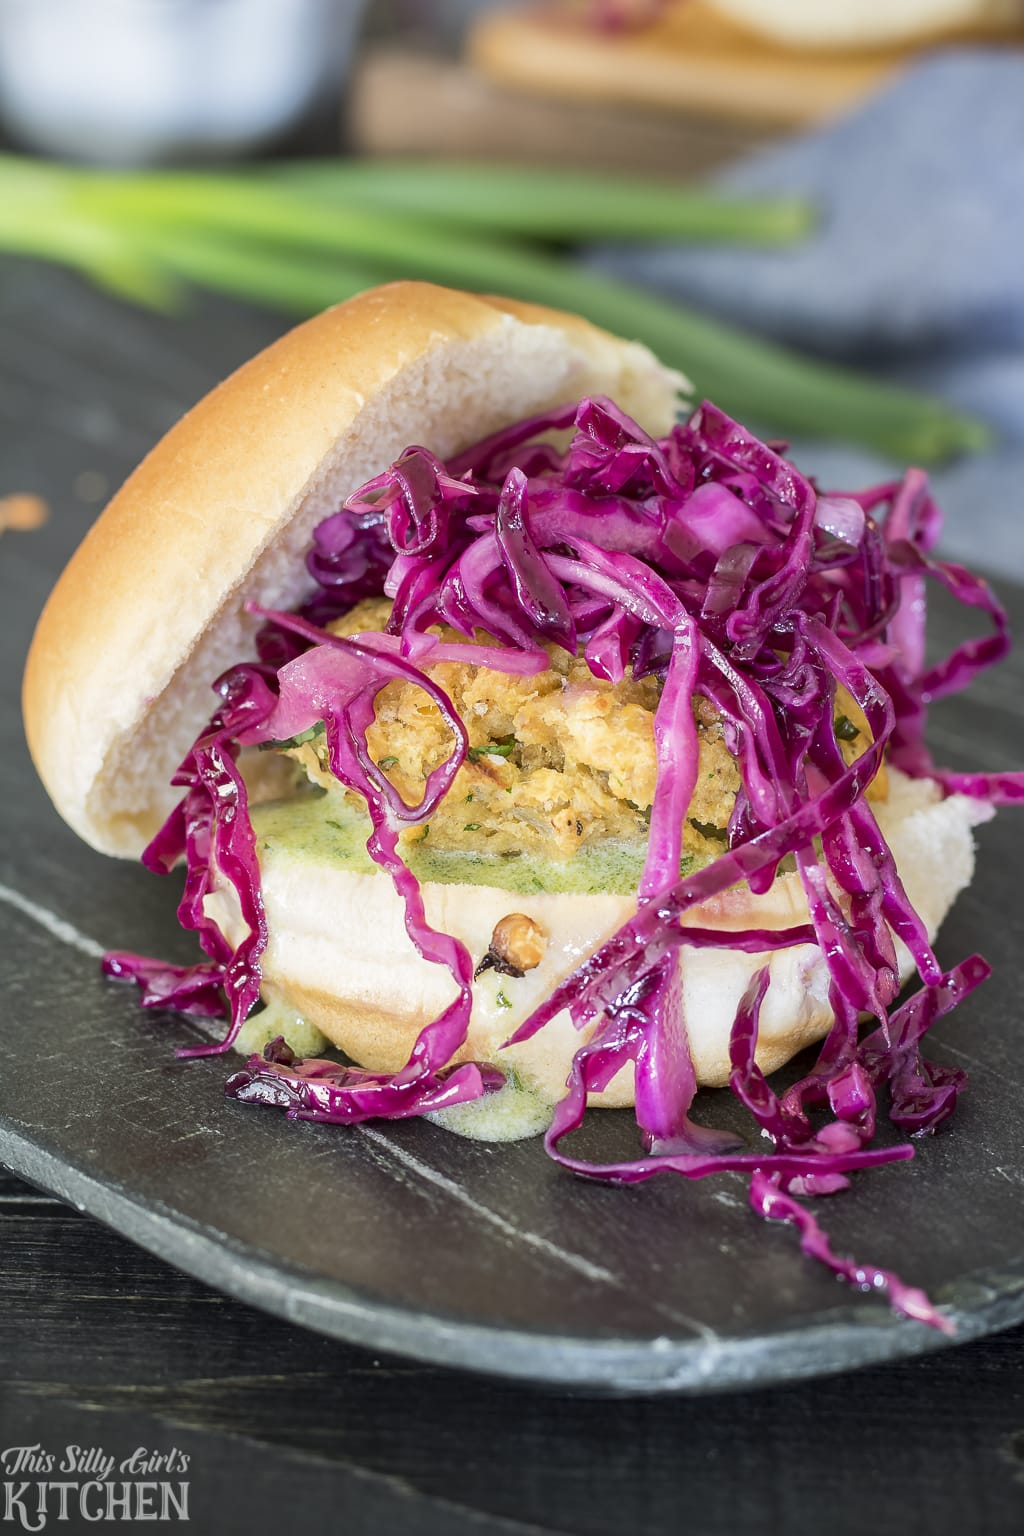 A lentil burger topped with red cabbage.